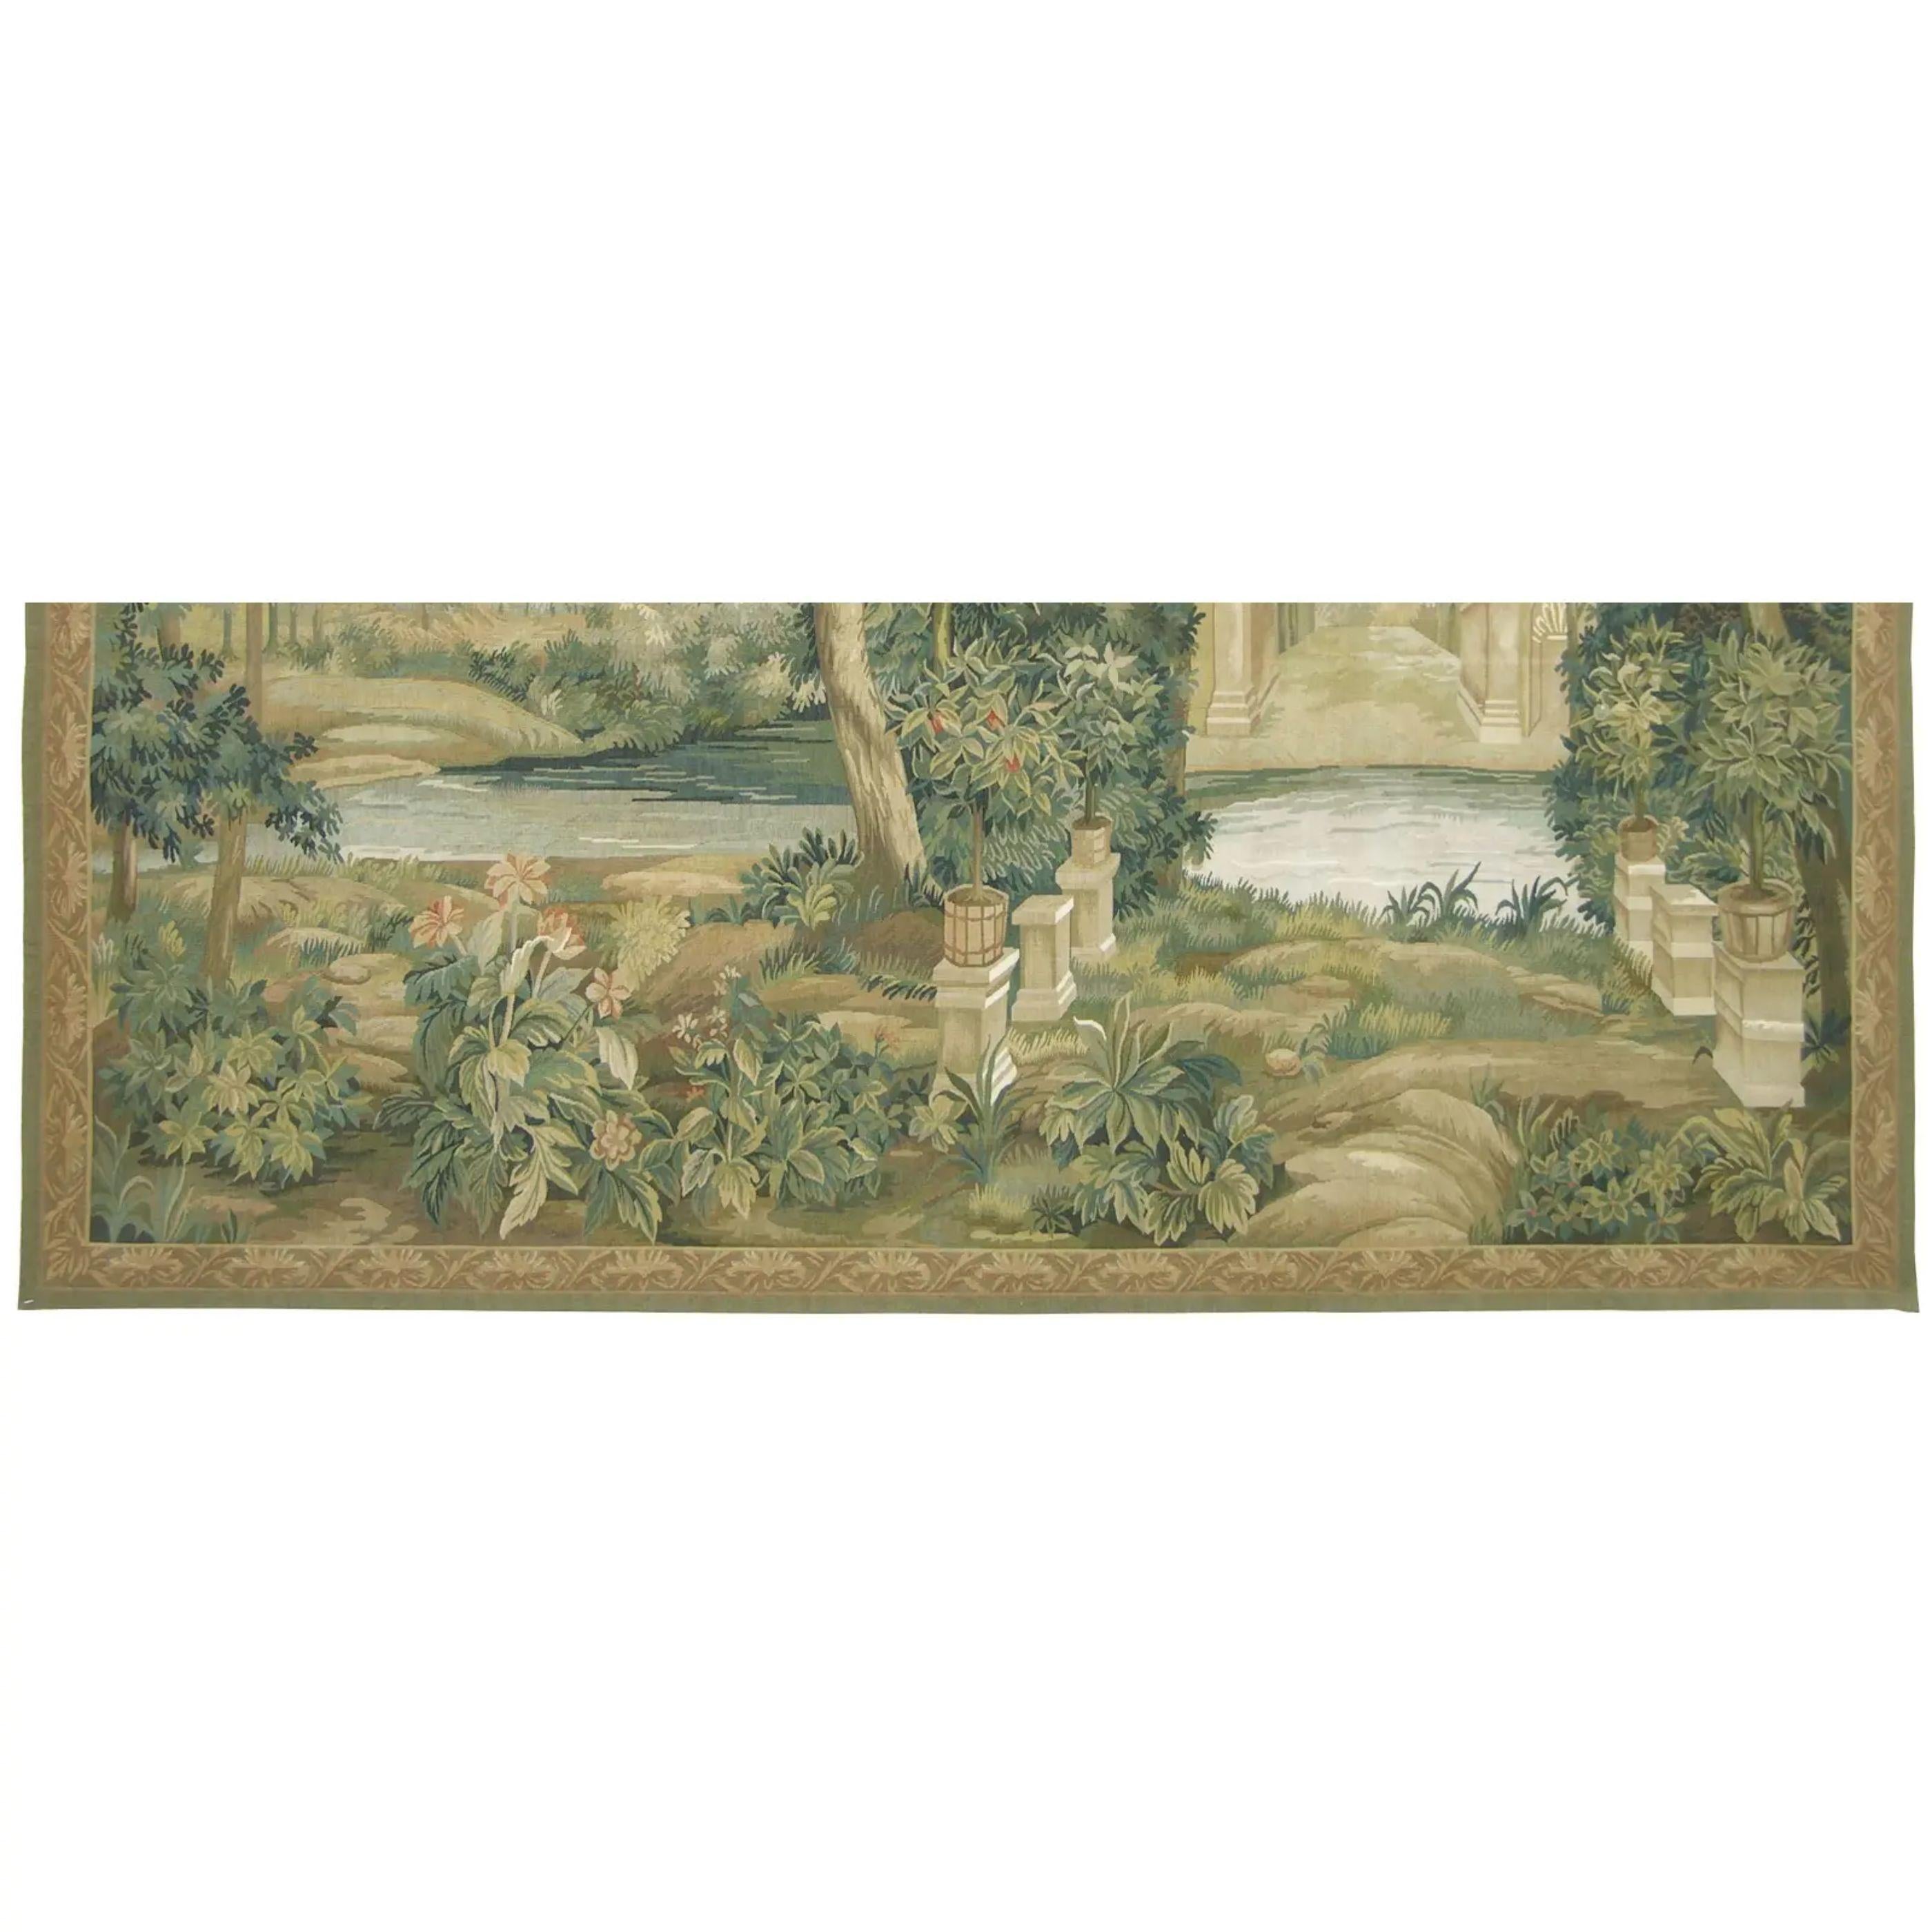 Unknown Vintage Tapestry Depicting River and Trees 6.4X5.0 For Sale